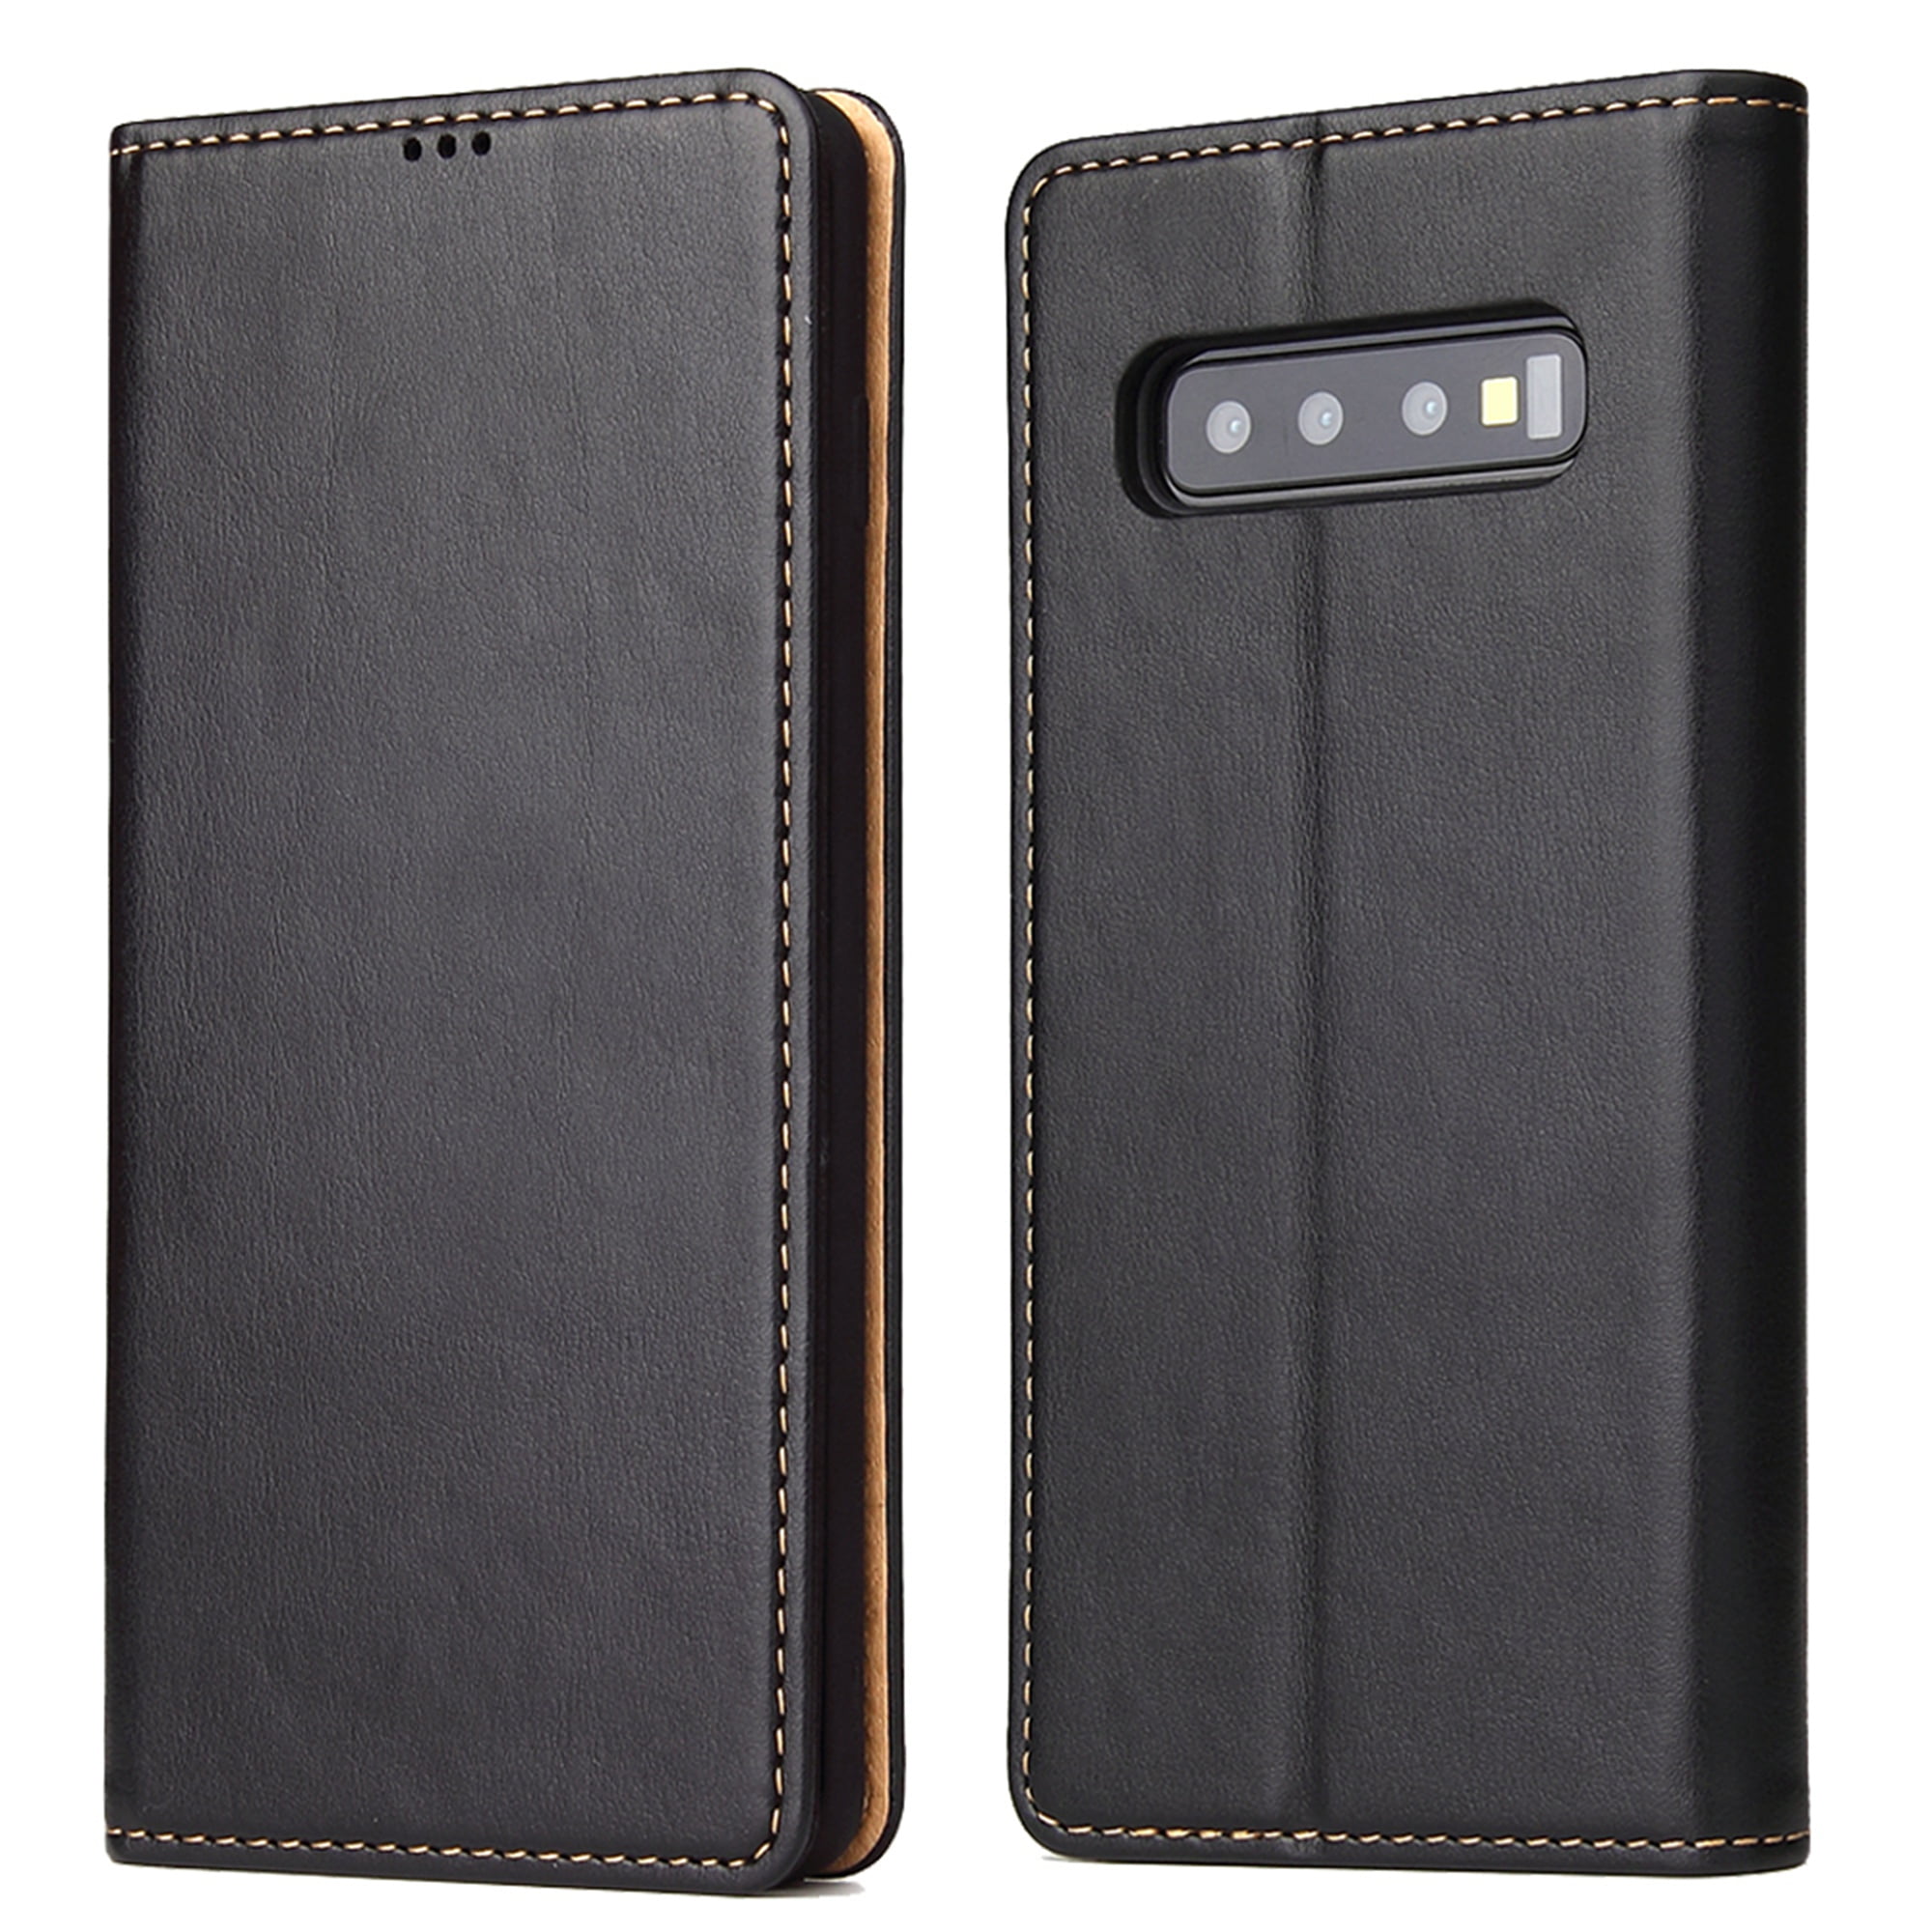 Leather Flip Case Fit for Samsung Galaxy S10e Unicorn Wallet Cover for Samsung Galaxy S10e